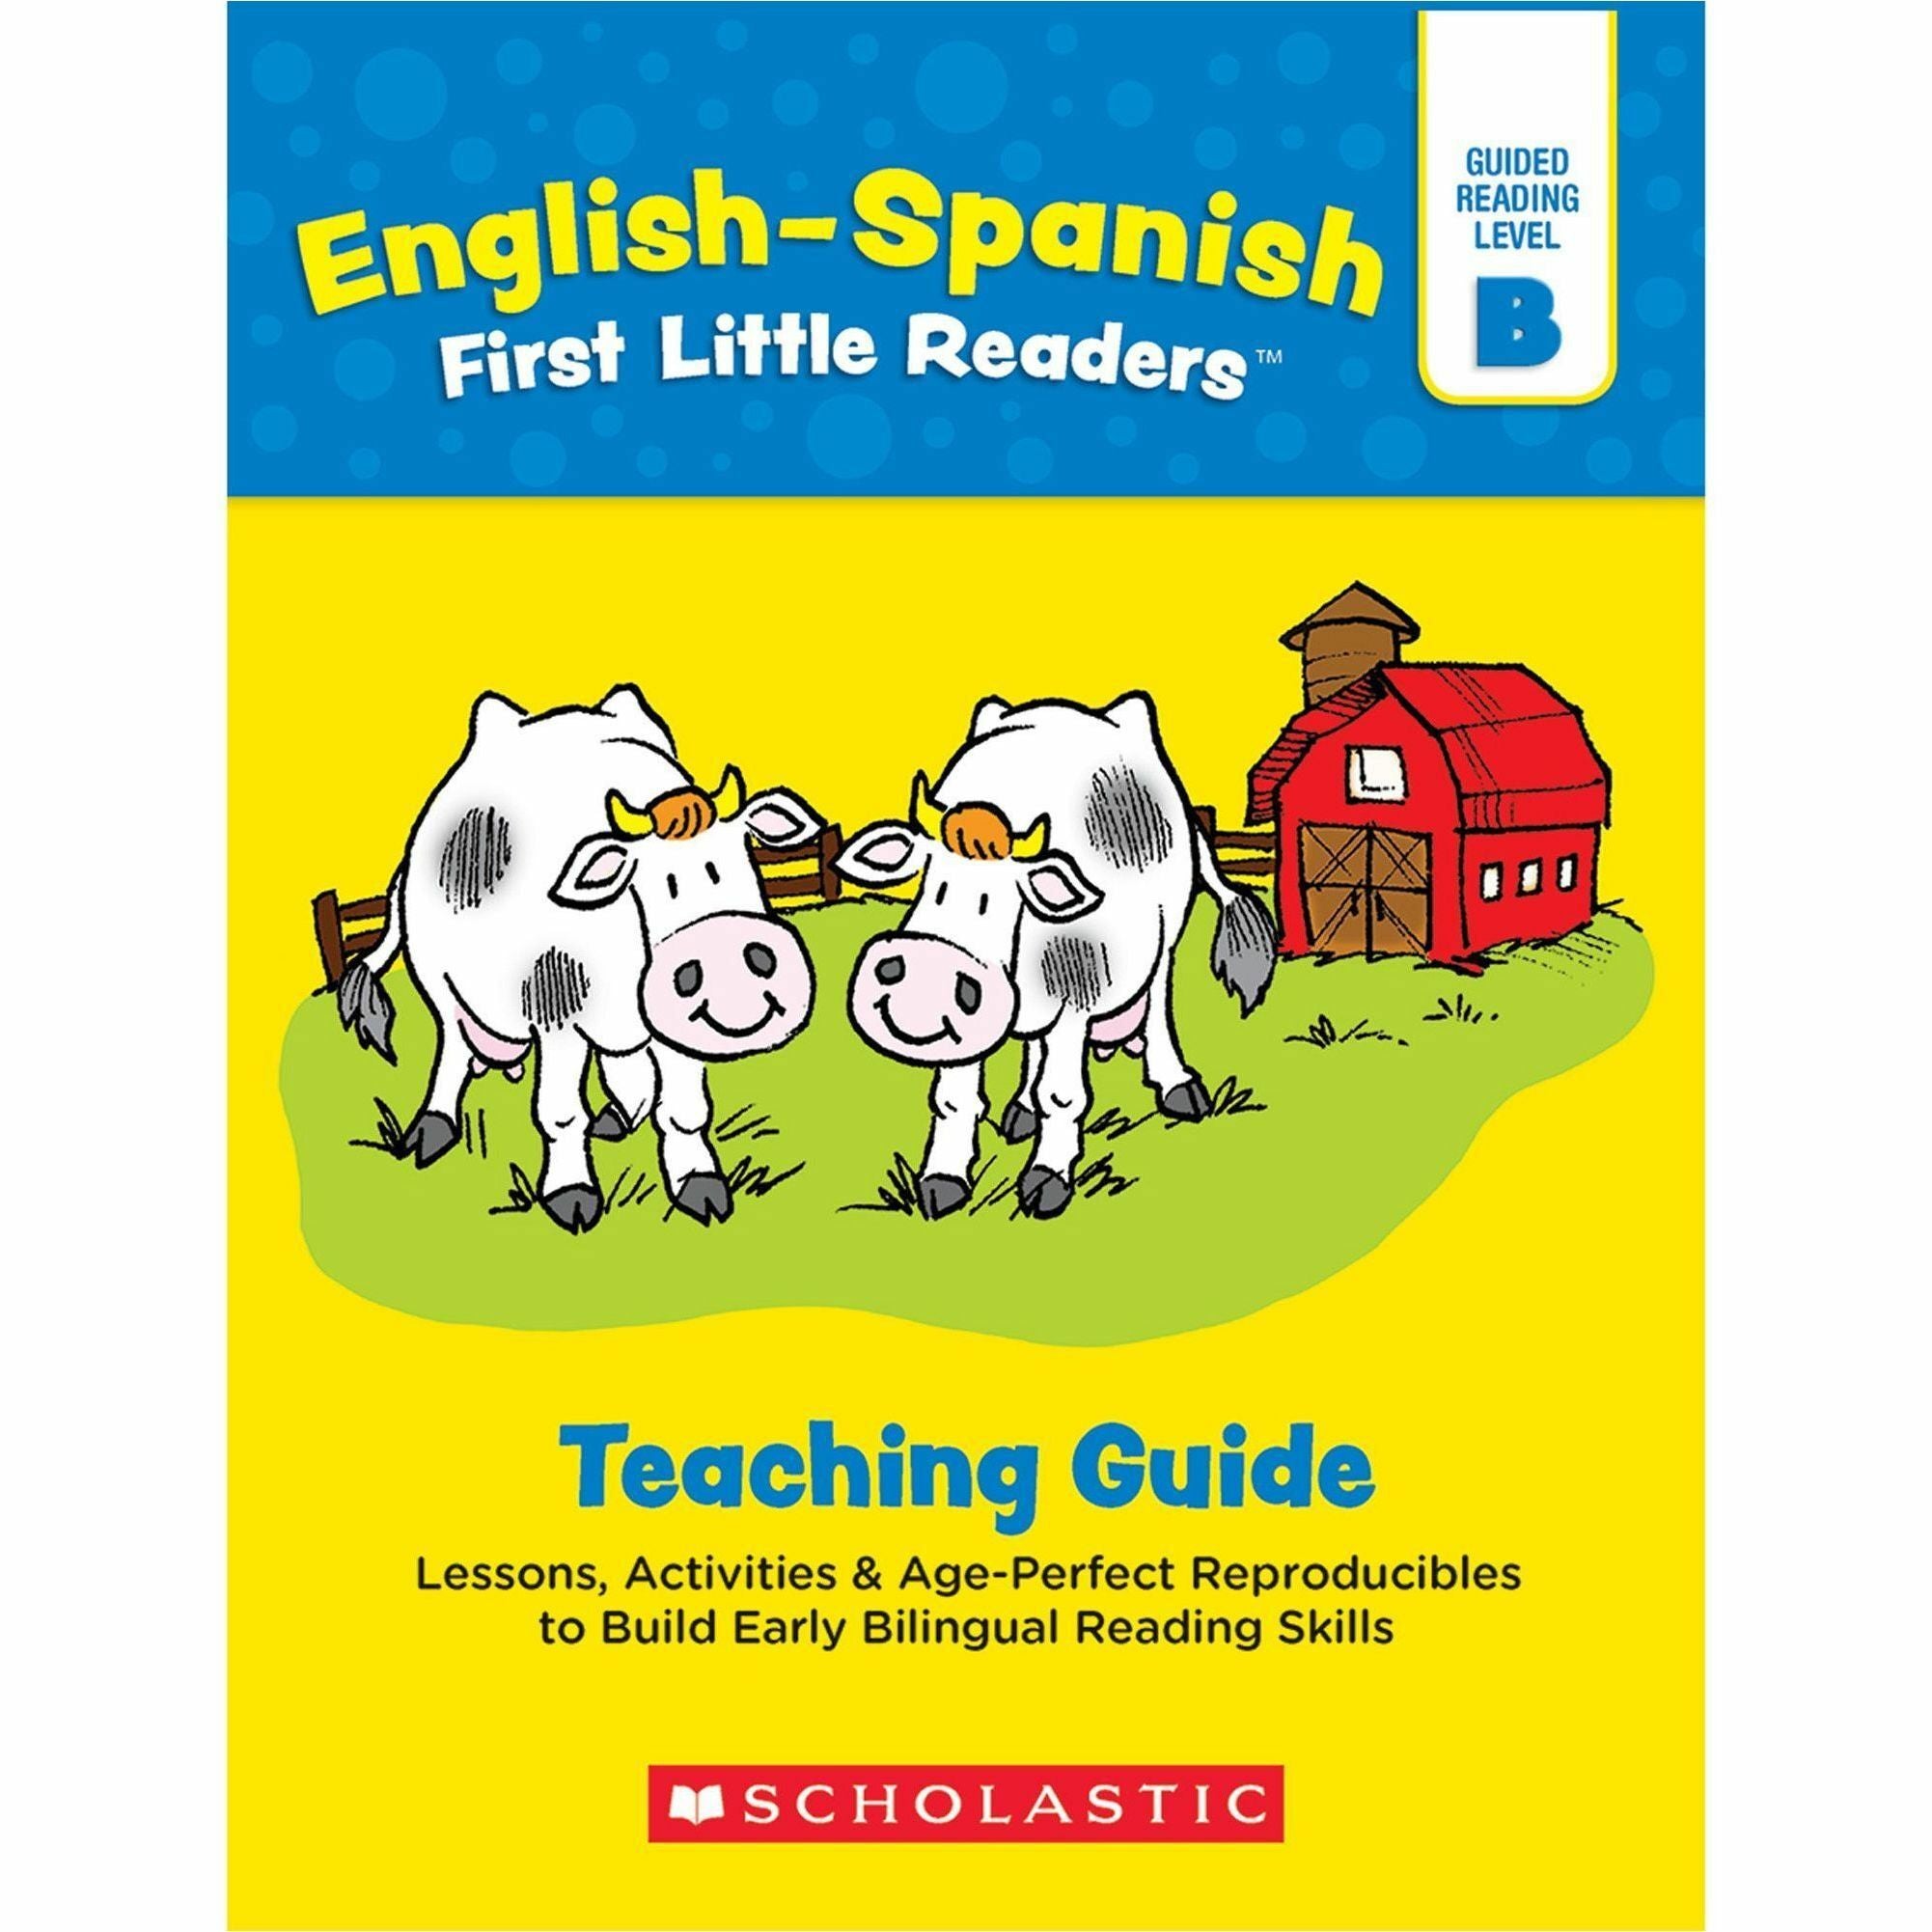 scholastic-first-little-readers-book-set-printed-book-by-liza-charlesworth-8-pages-scholastic-teaching-resources-publication-june-1-2020-book-grade-preschool-2-english-spanish_shs1338668048 - 2